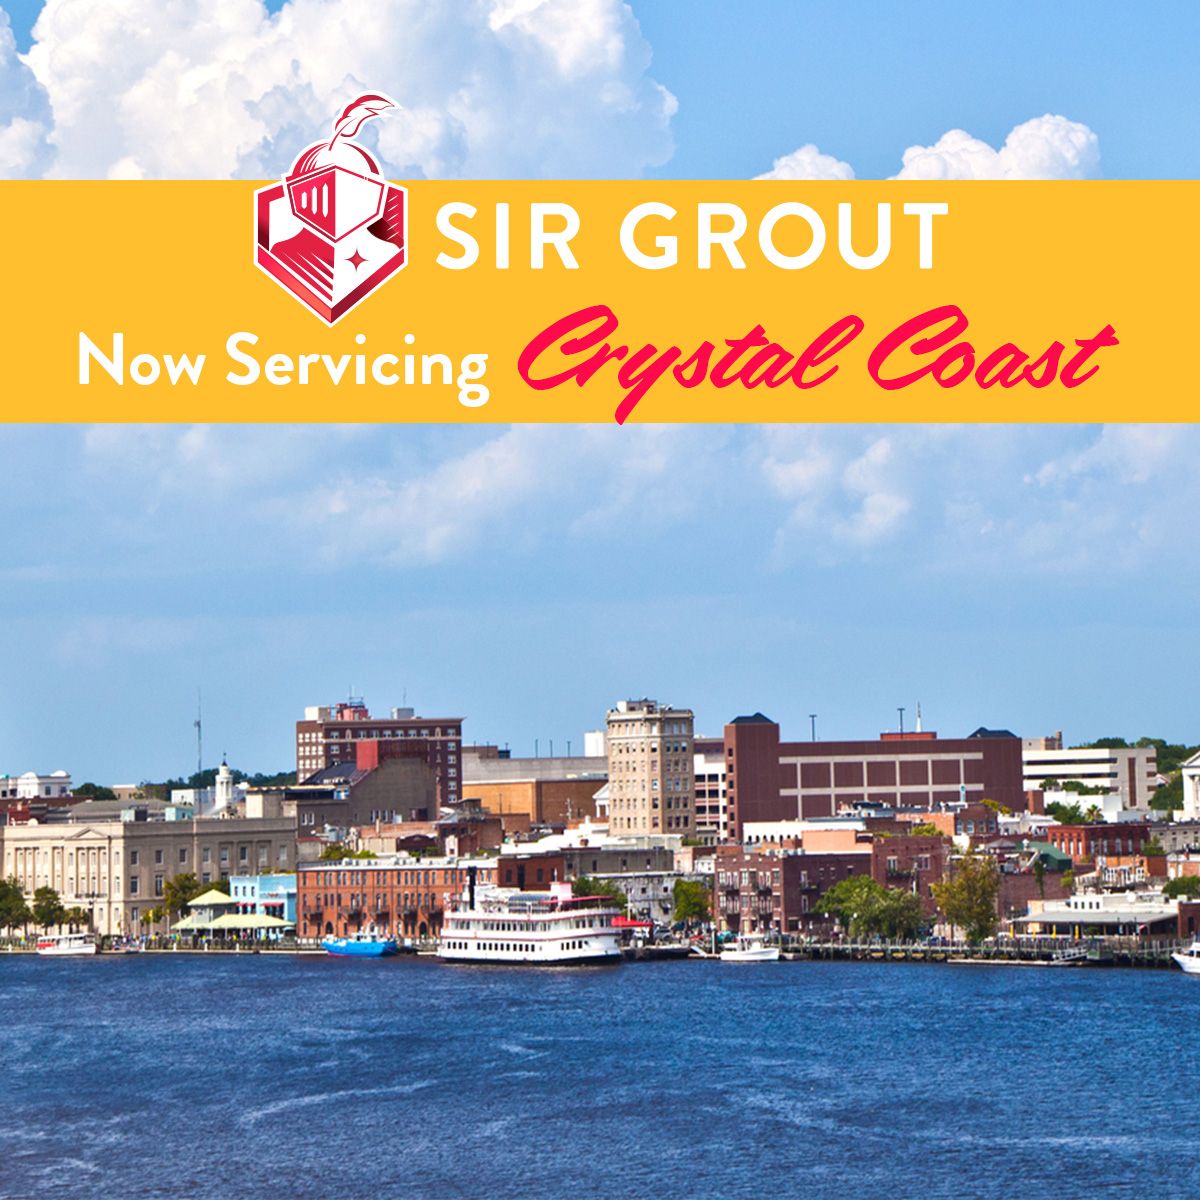 Sir Grout Now Servicing Crystal Coast and Surrounding Areas